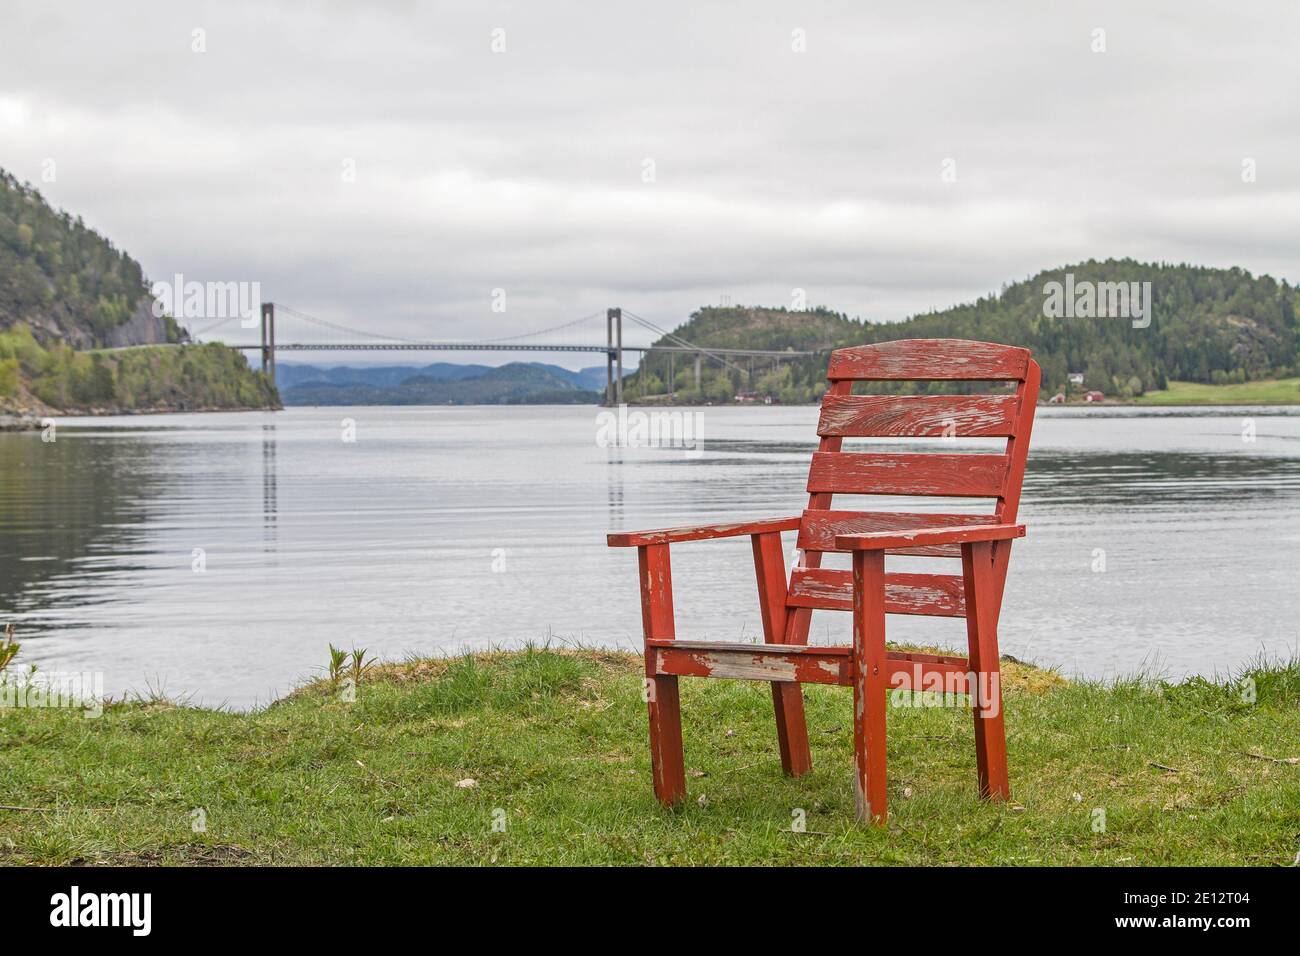 View From The Comfortable Chair To The Bridge Over The Namsenfjord Which Connects The Mainland And Otteroya Island Stock Photo